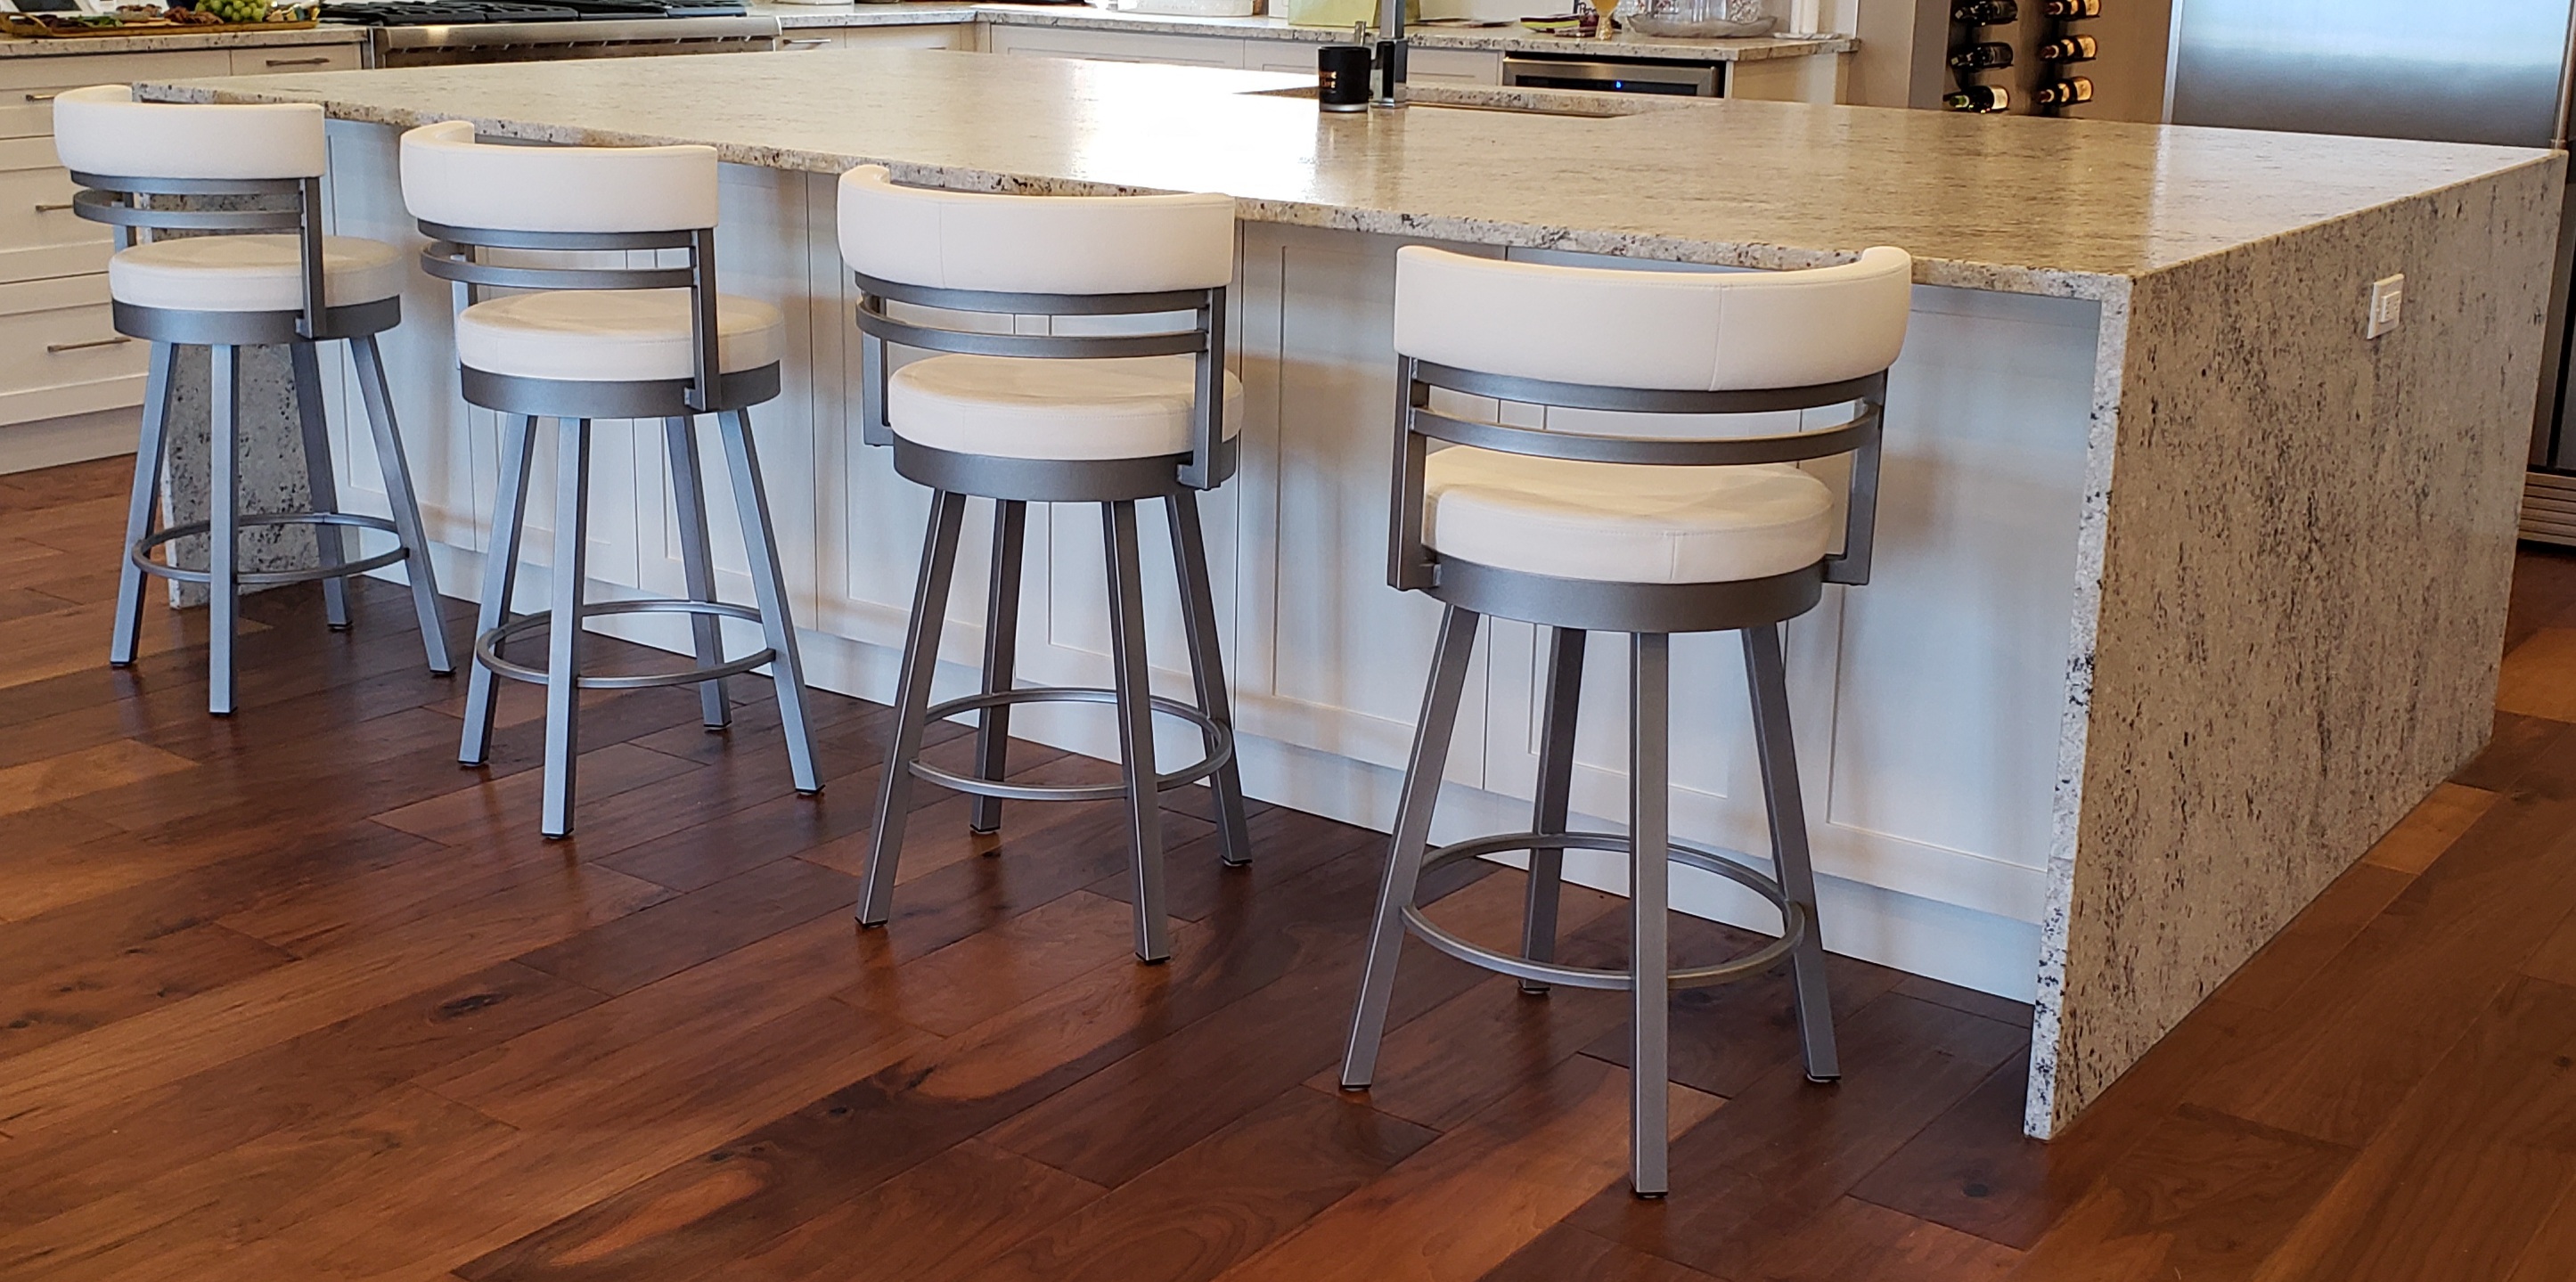 kitchen bar stools for sale cape town